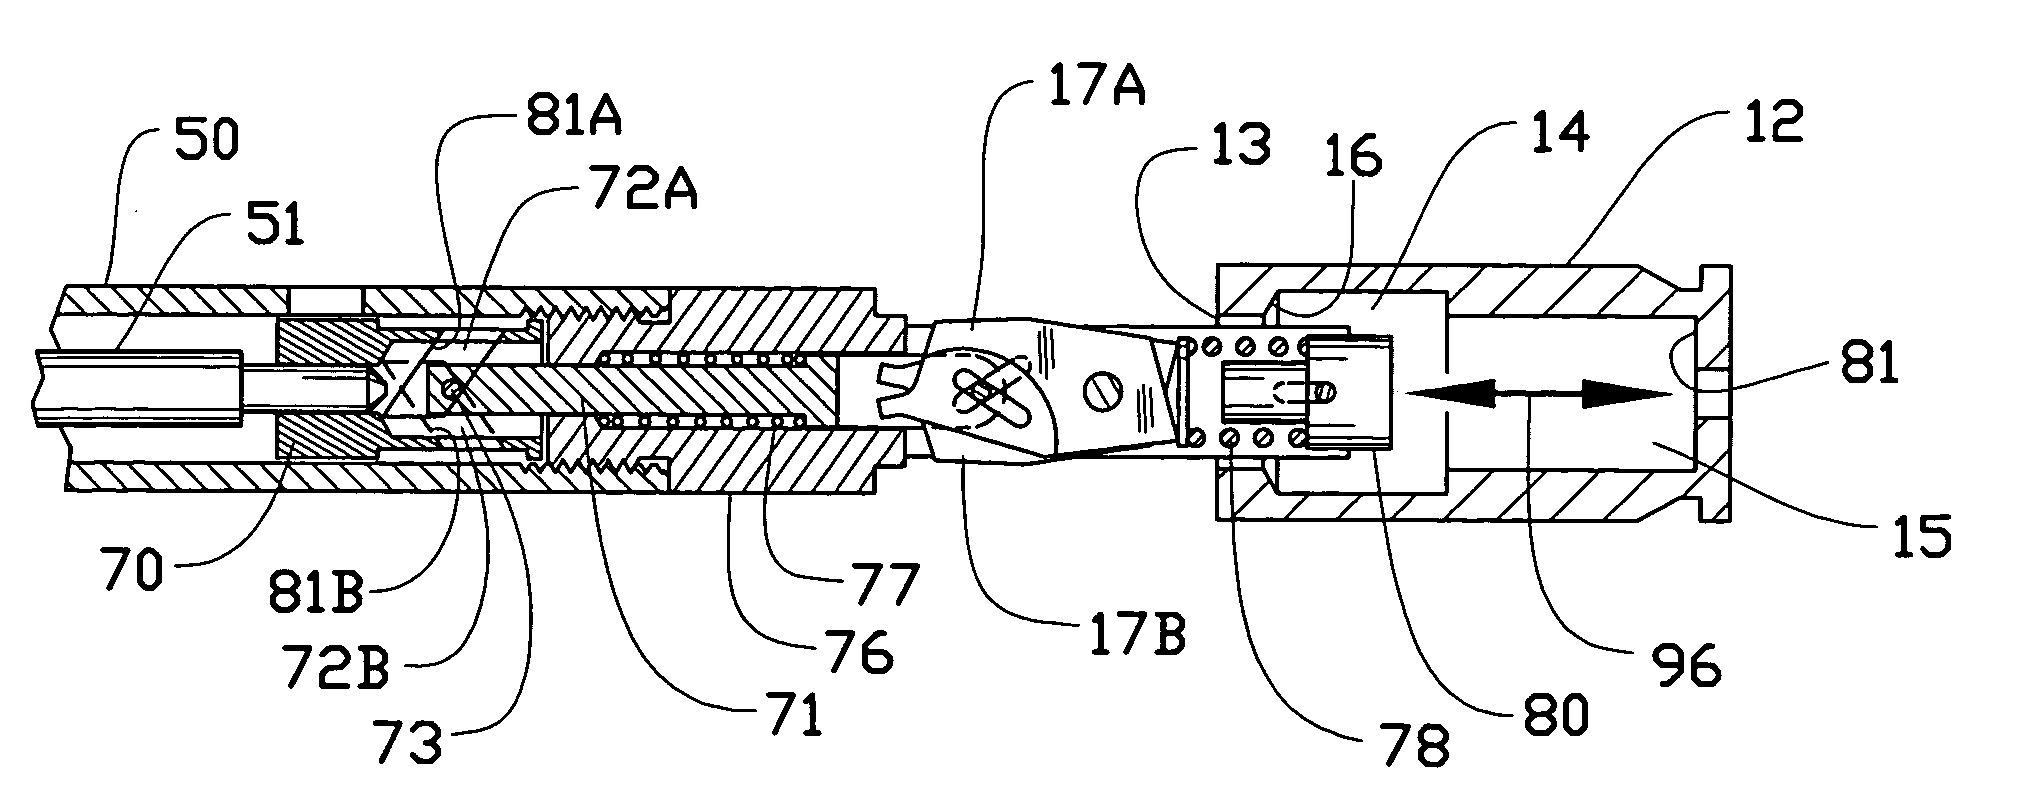 Auto-eject gun-lock device with ring-mounted key